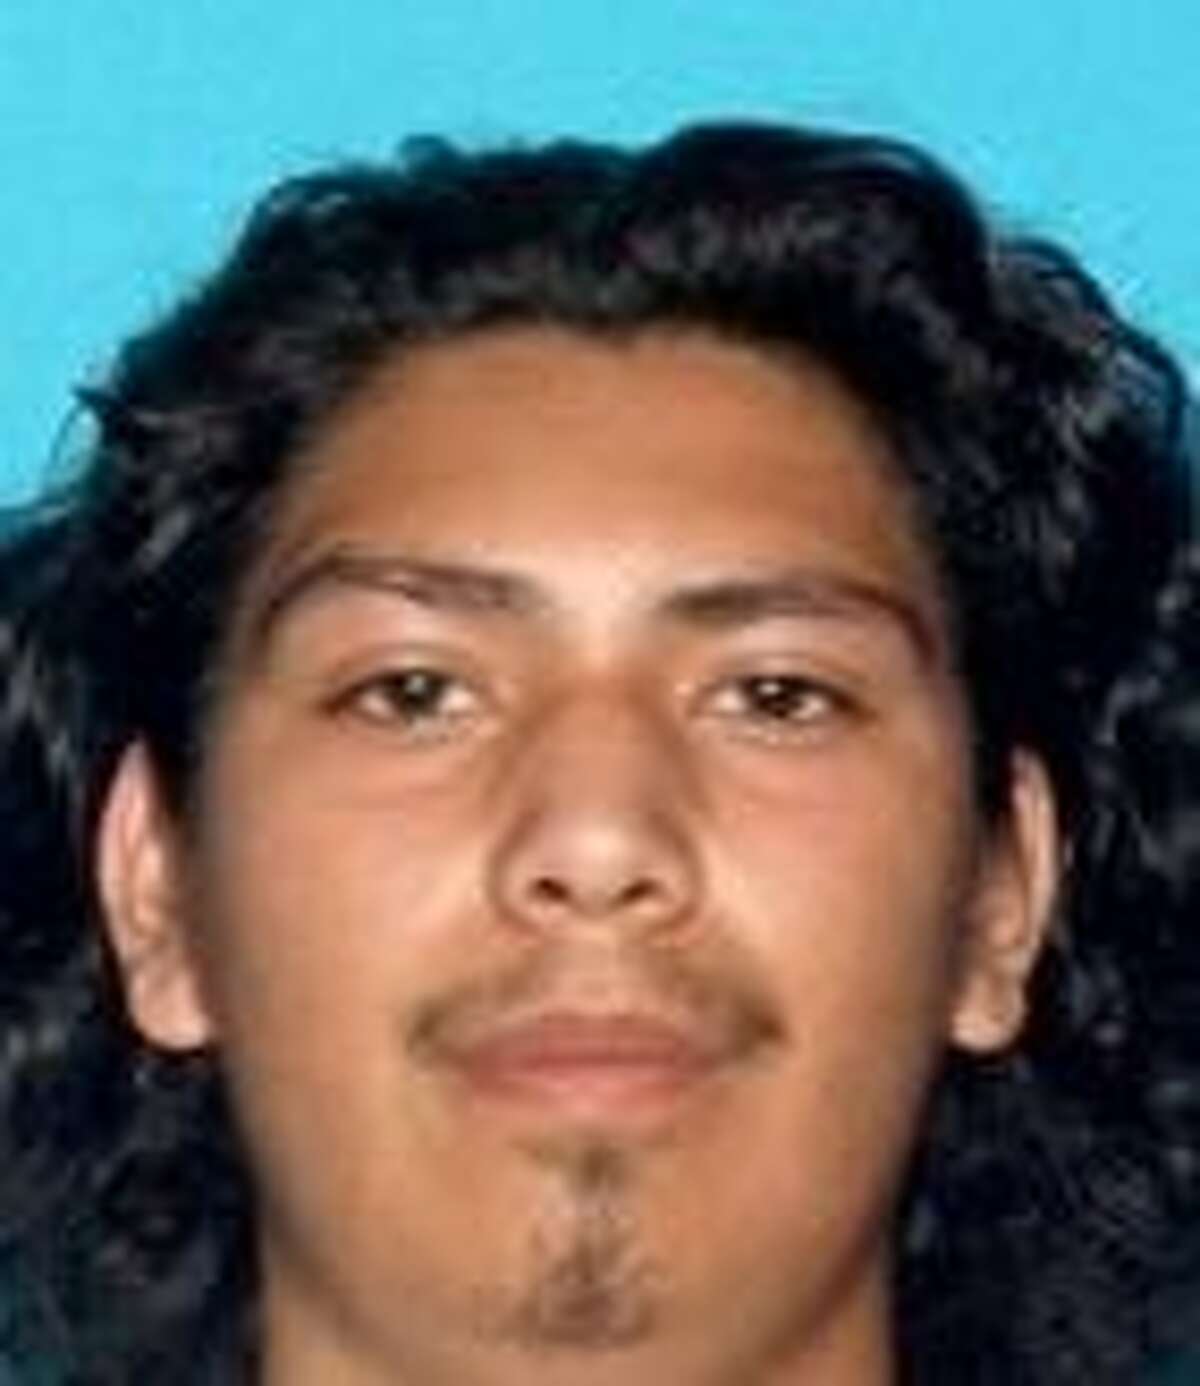 Manuel Lopez, 22, of San Jose, was arrested Tuesday after he allegedly killed and sexually assaulted his girlfriend's 2-year-old son.